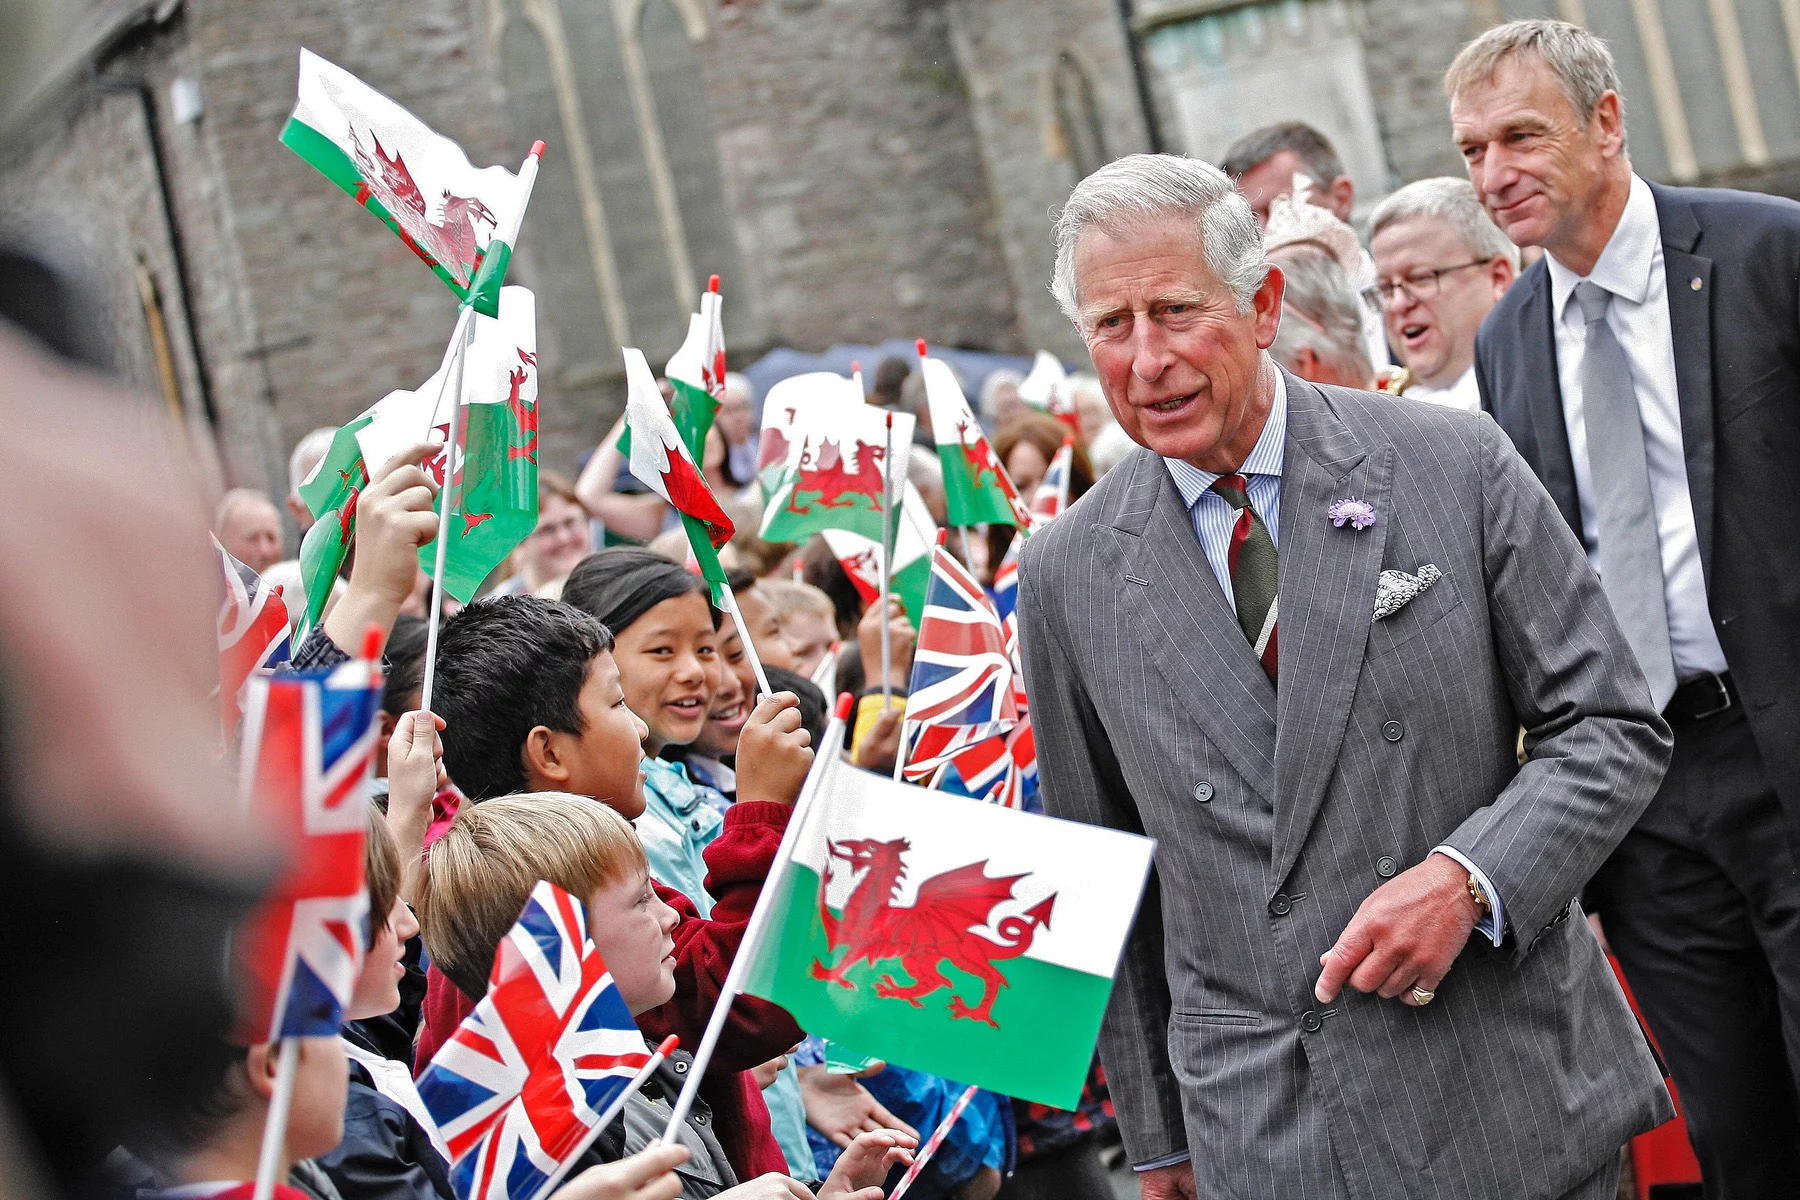 Primary students welcome the Prince of Wales in Brecon, Powys, Wales